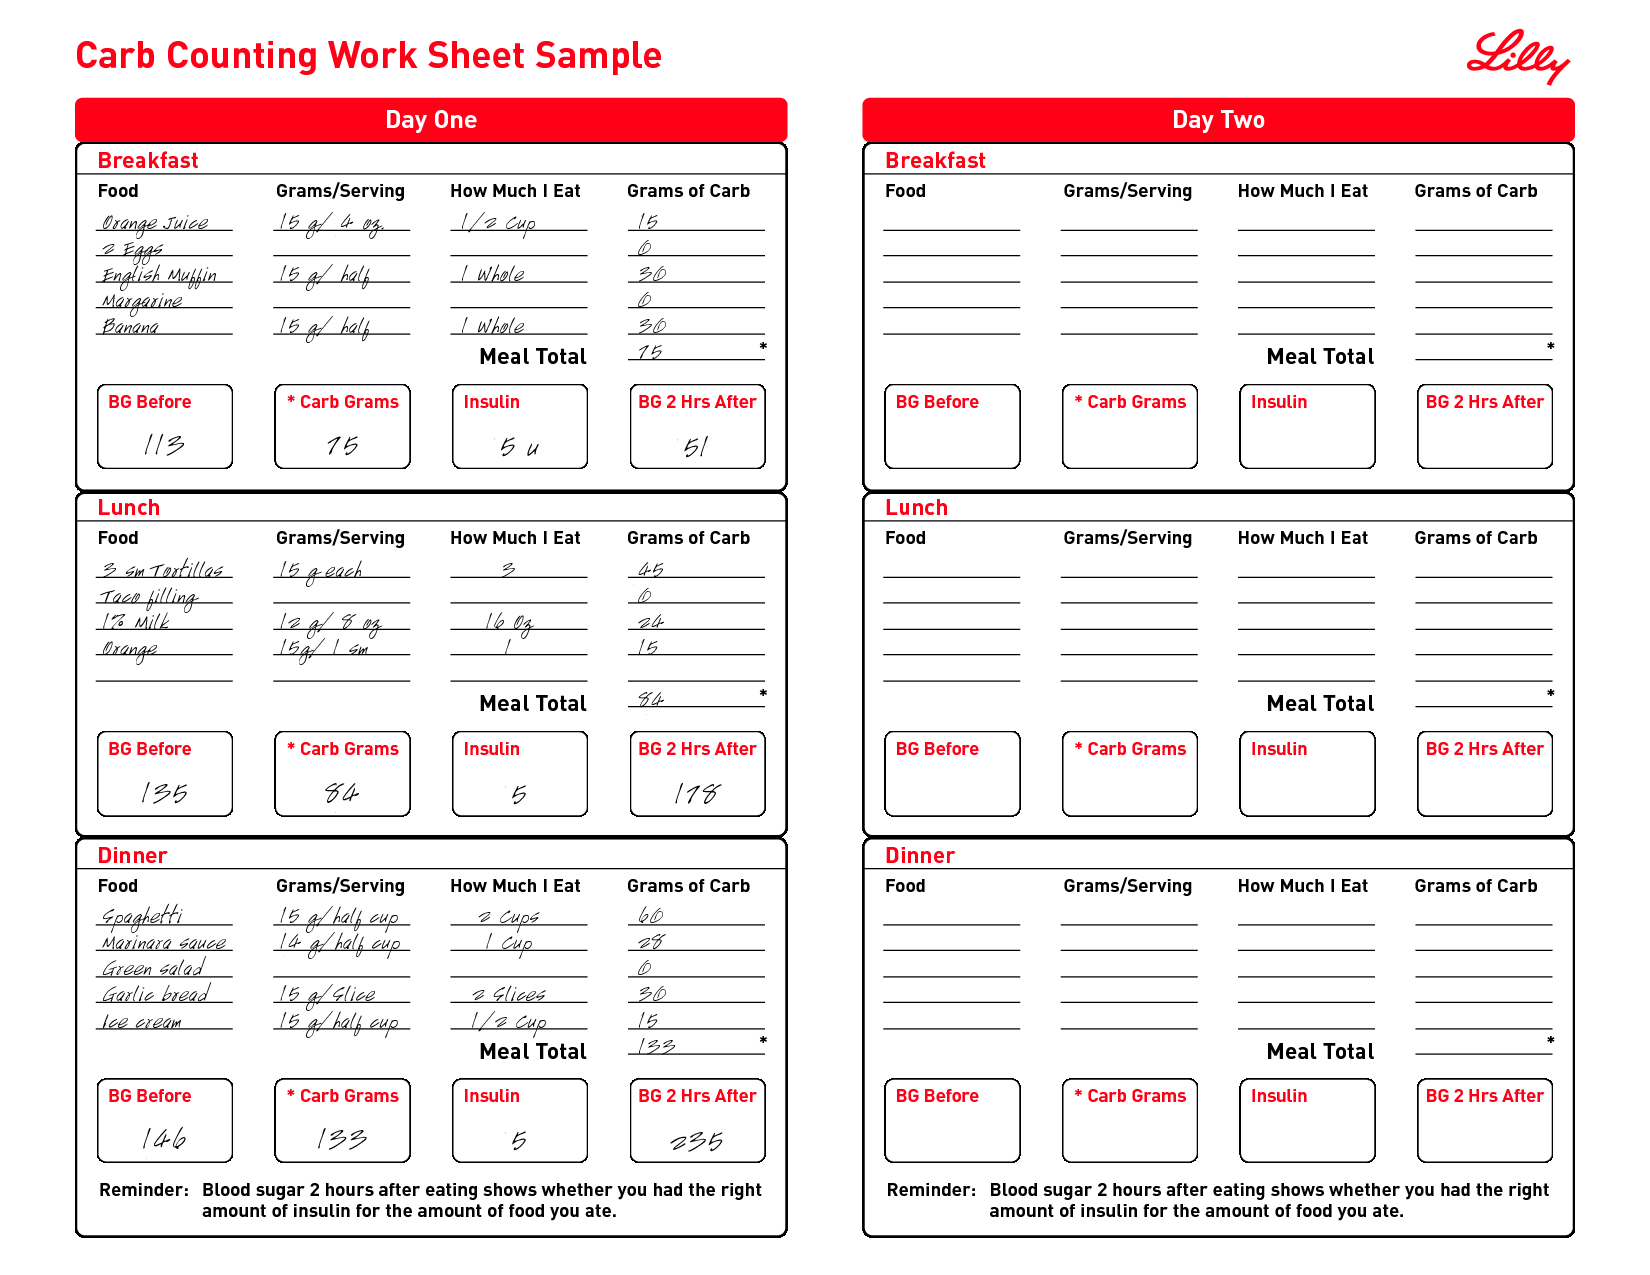 Free Print Carb Counter Chart | Carb Counting Work Sheet Sample - Free Printable Calorie Counter Sheet